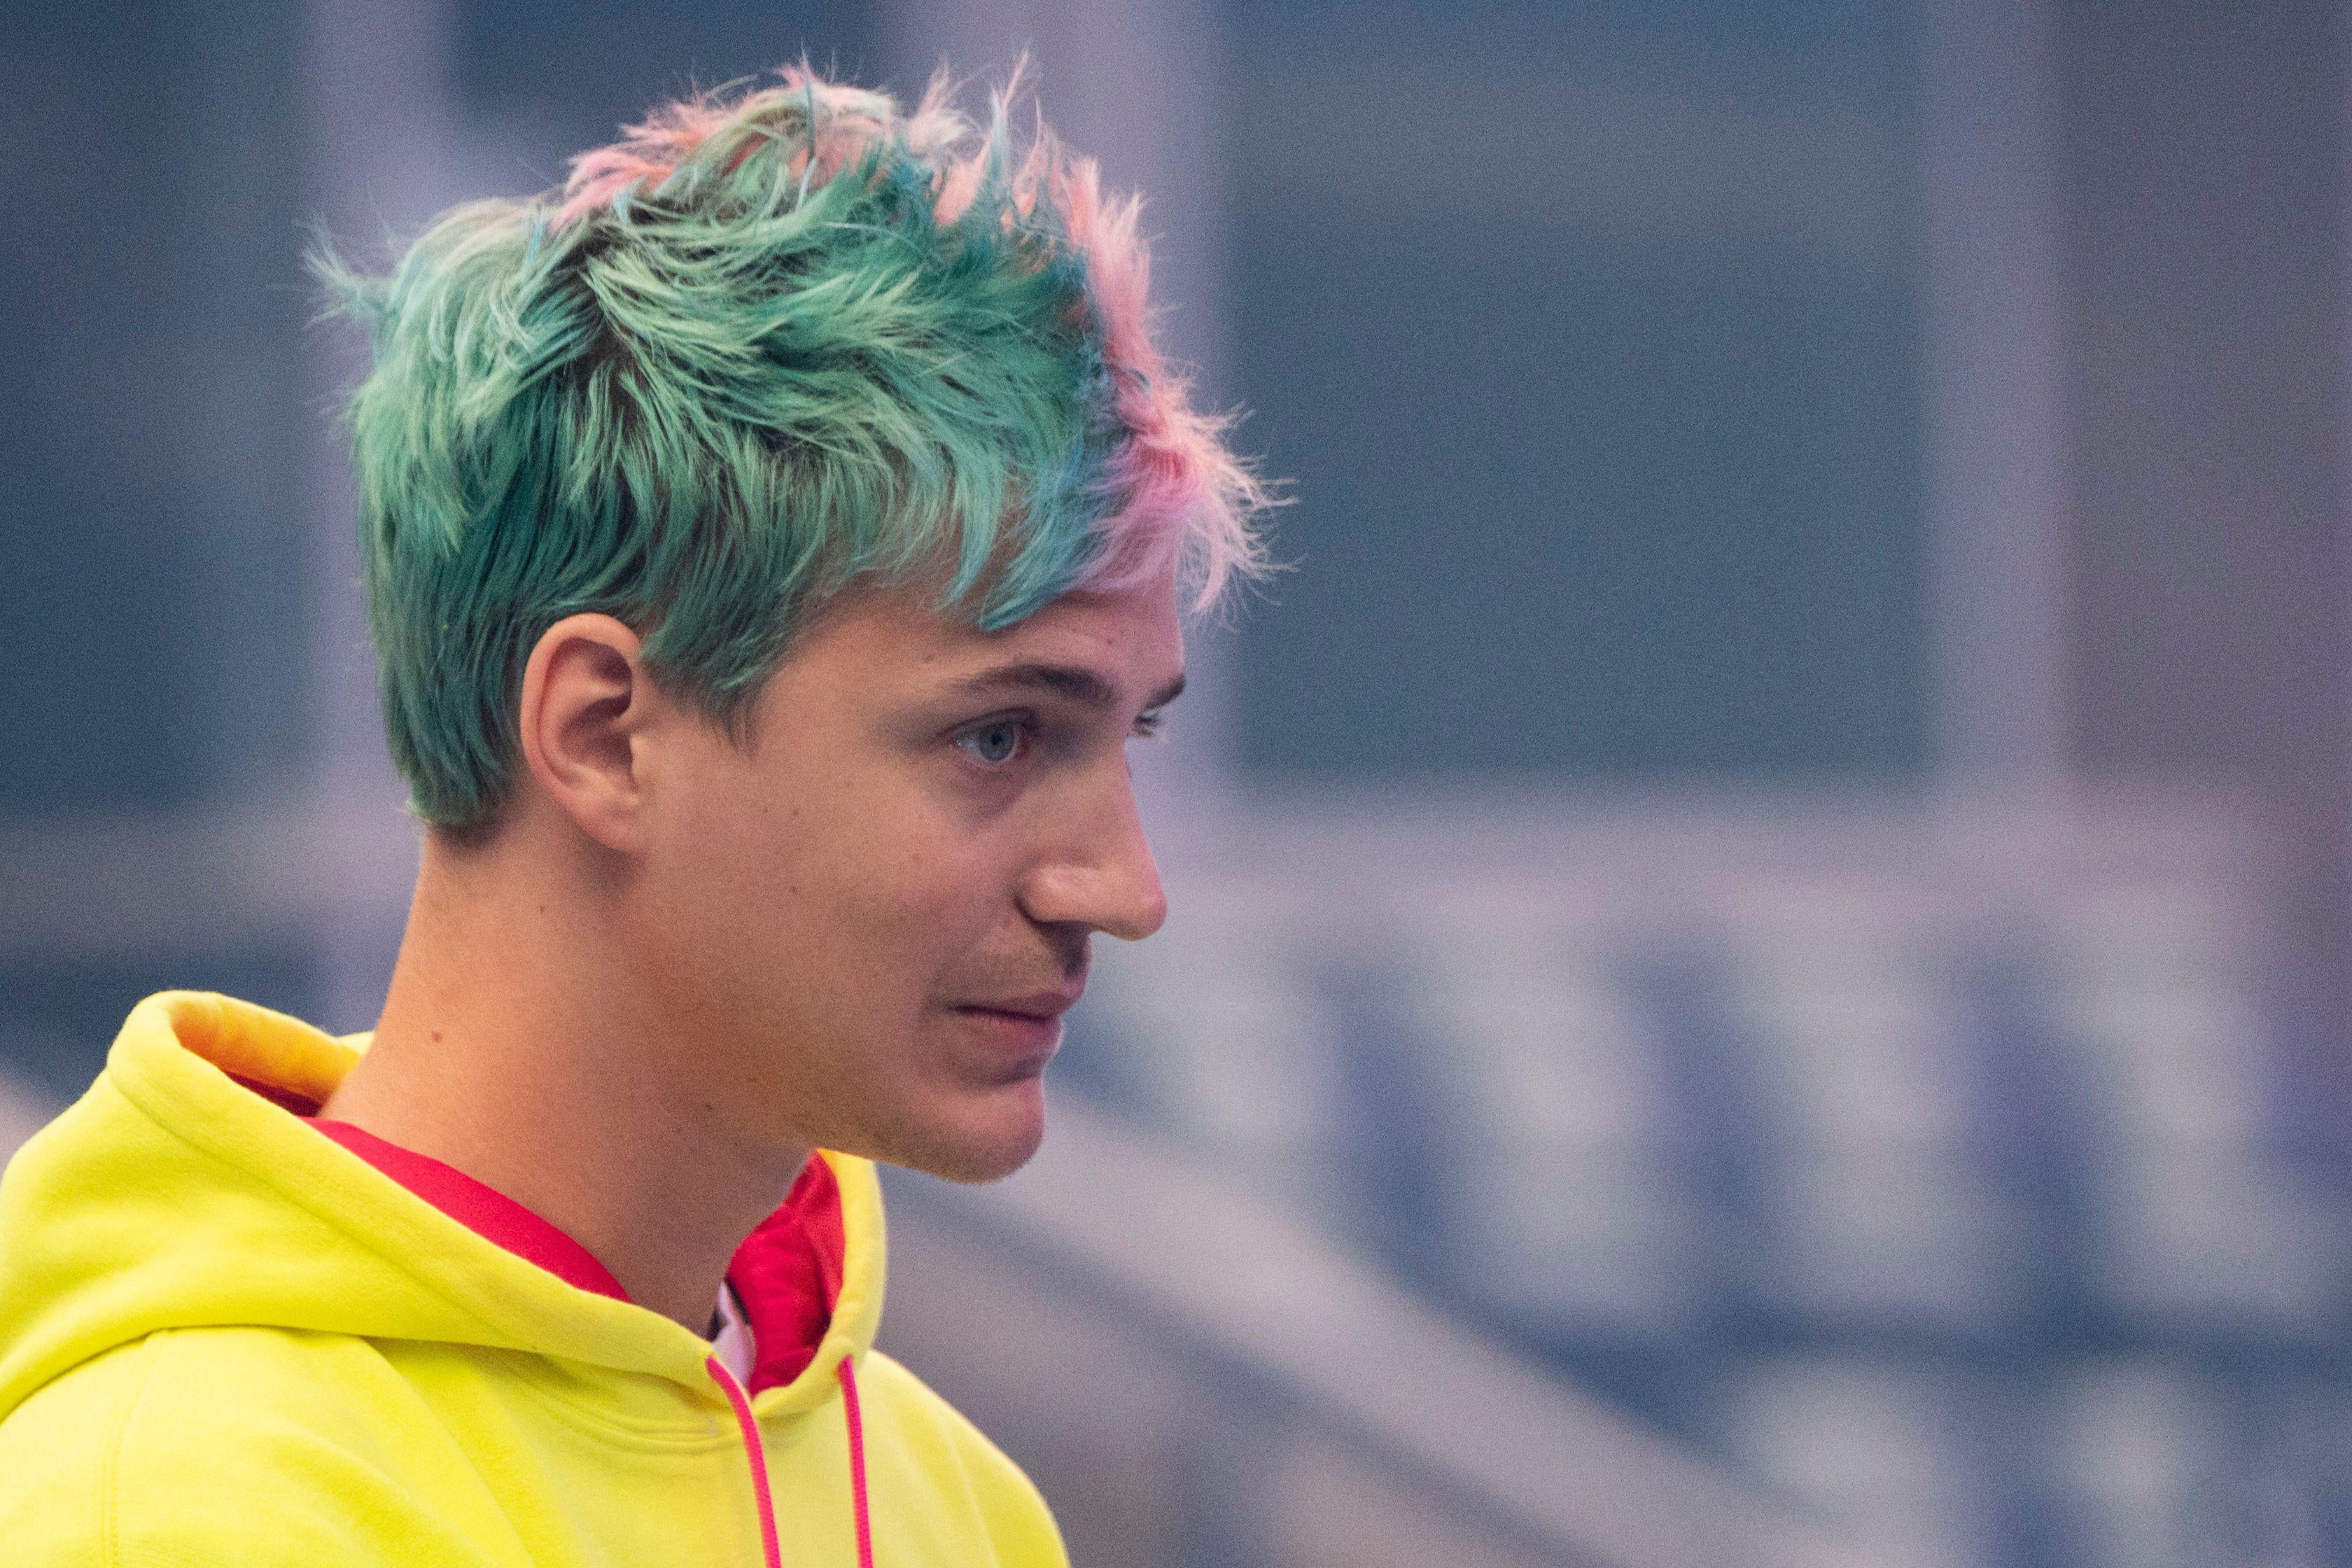 Ninja speaks to the crowd at the start of the 2019 Fortnite World Cup Finals.